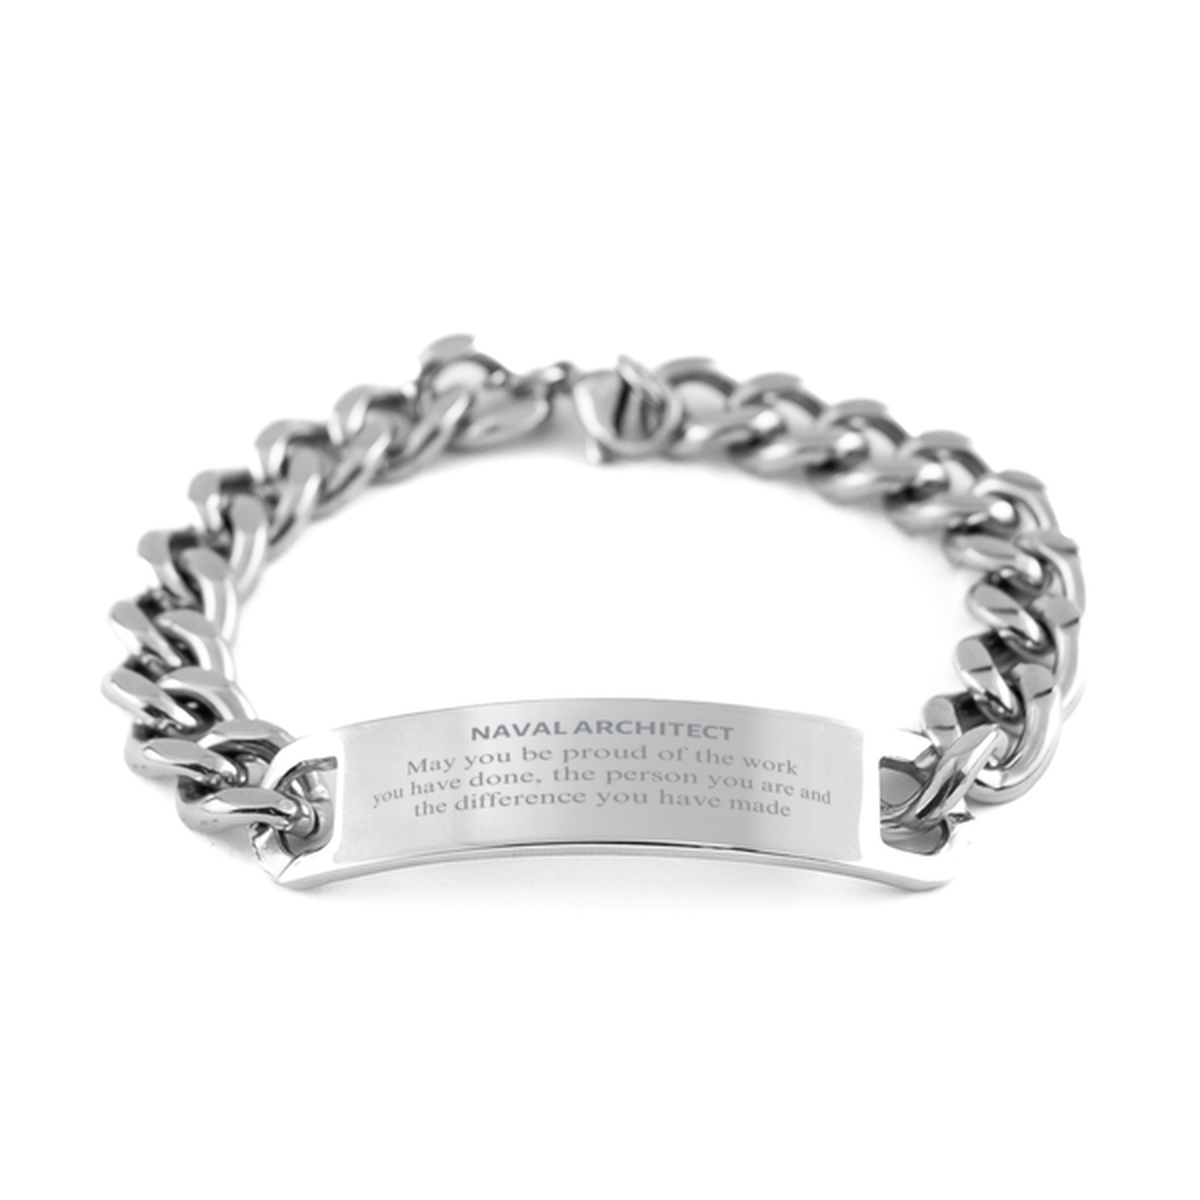 Naval Architect May you be proud of the work you have done, Retirement Naval Architect Cuban Chain Stainless Steel Bracelet for Colleague Appreciation Gifts Amazing for Naval Architect